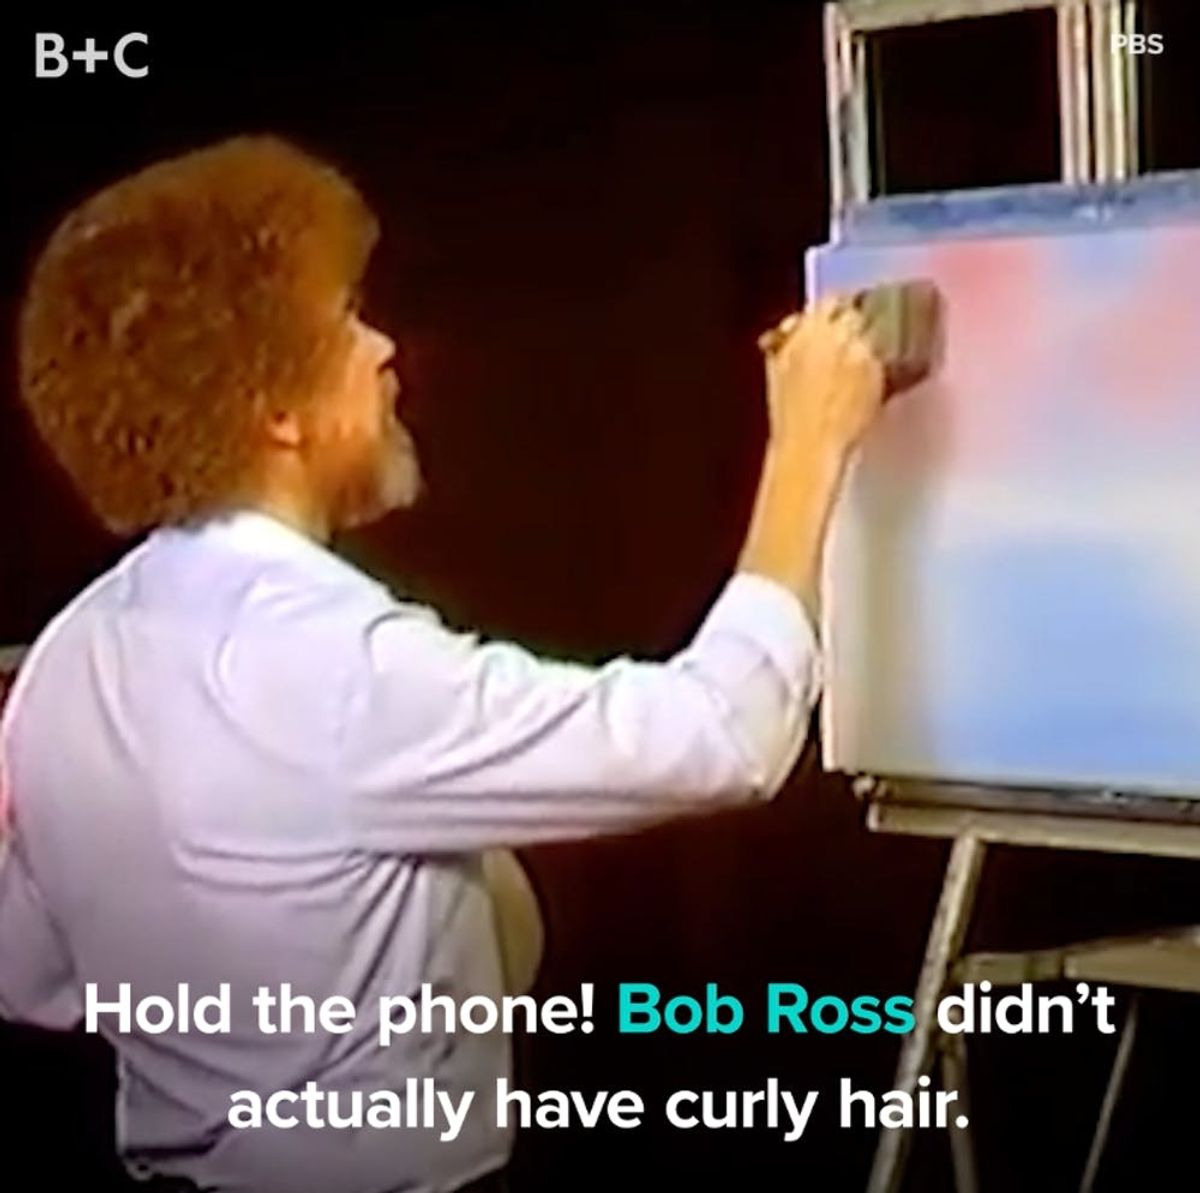 PSA! Bob Ross Didn’t Have Curly Hair